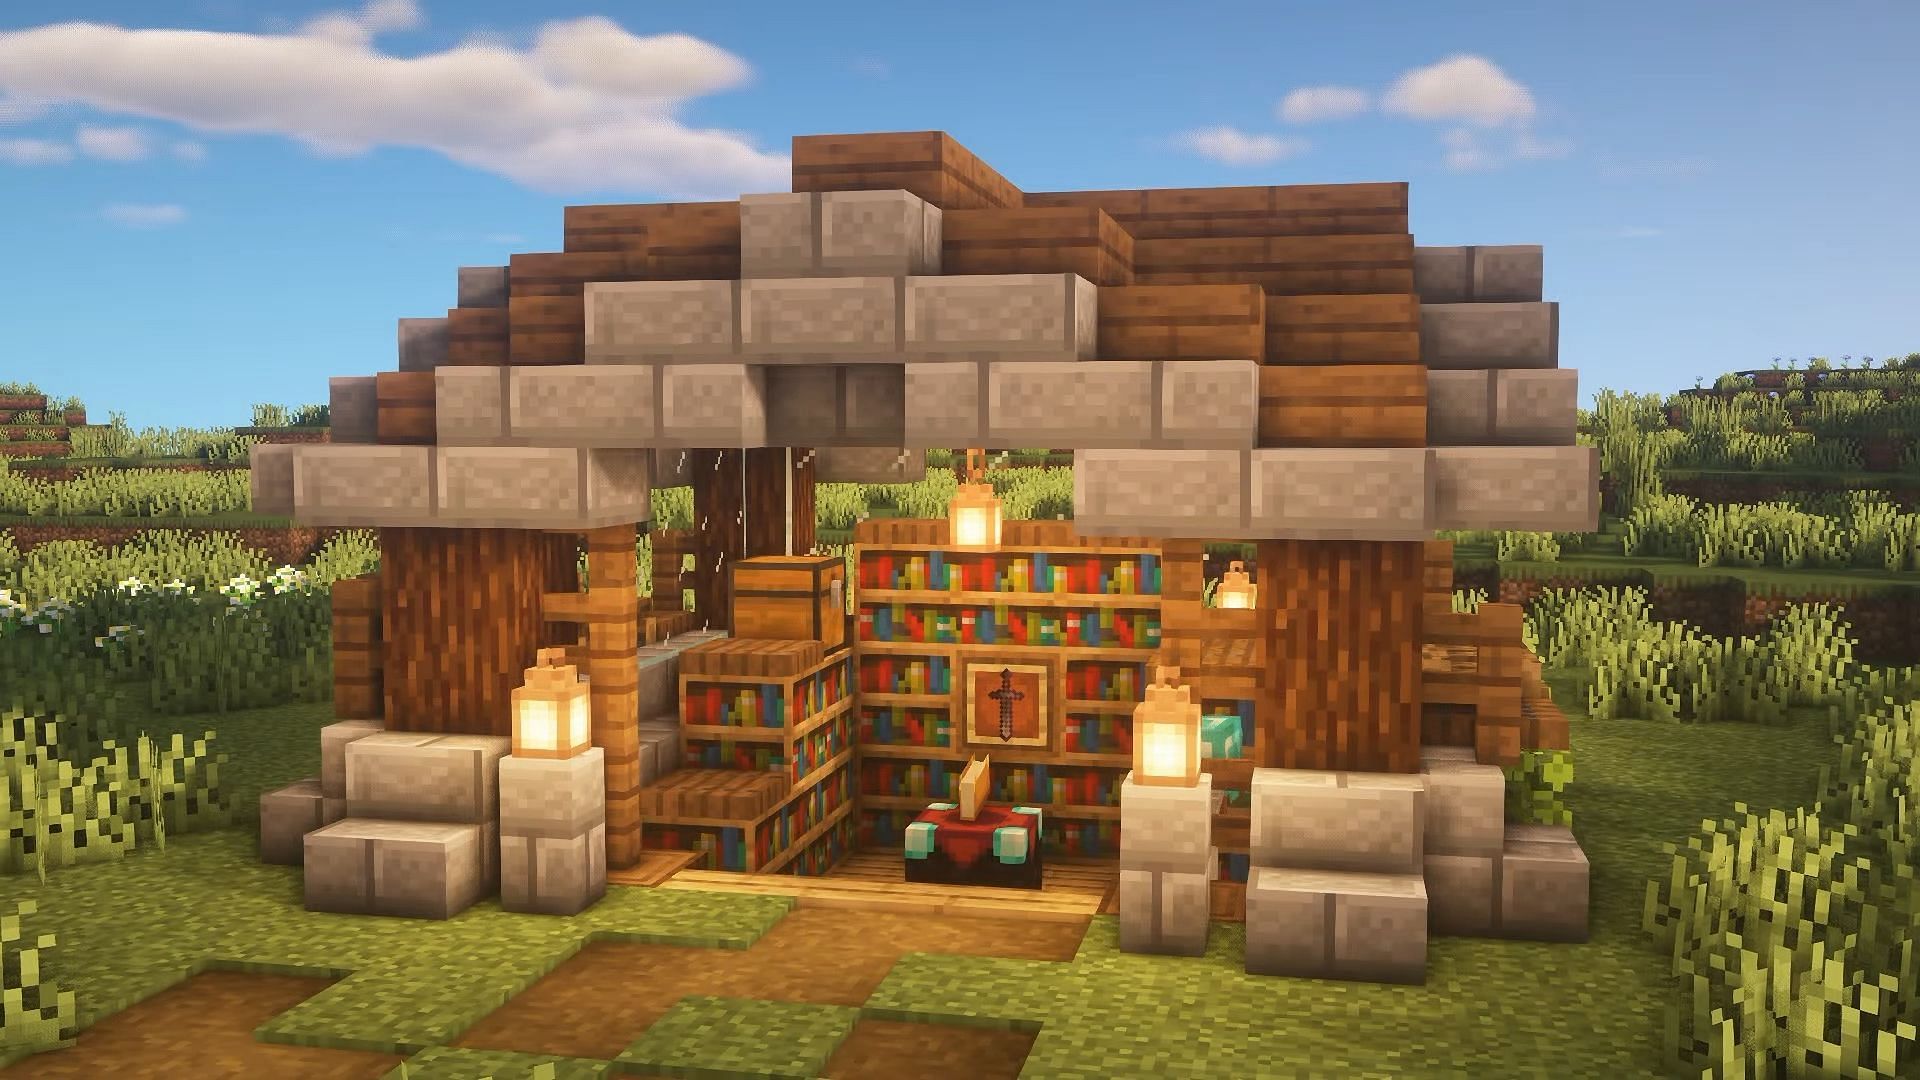 This house may not have all the typical amenities, but it can always be improved upon (Image via Balzy/YouTube)